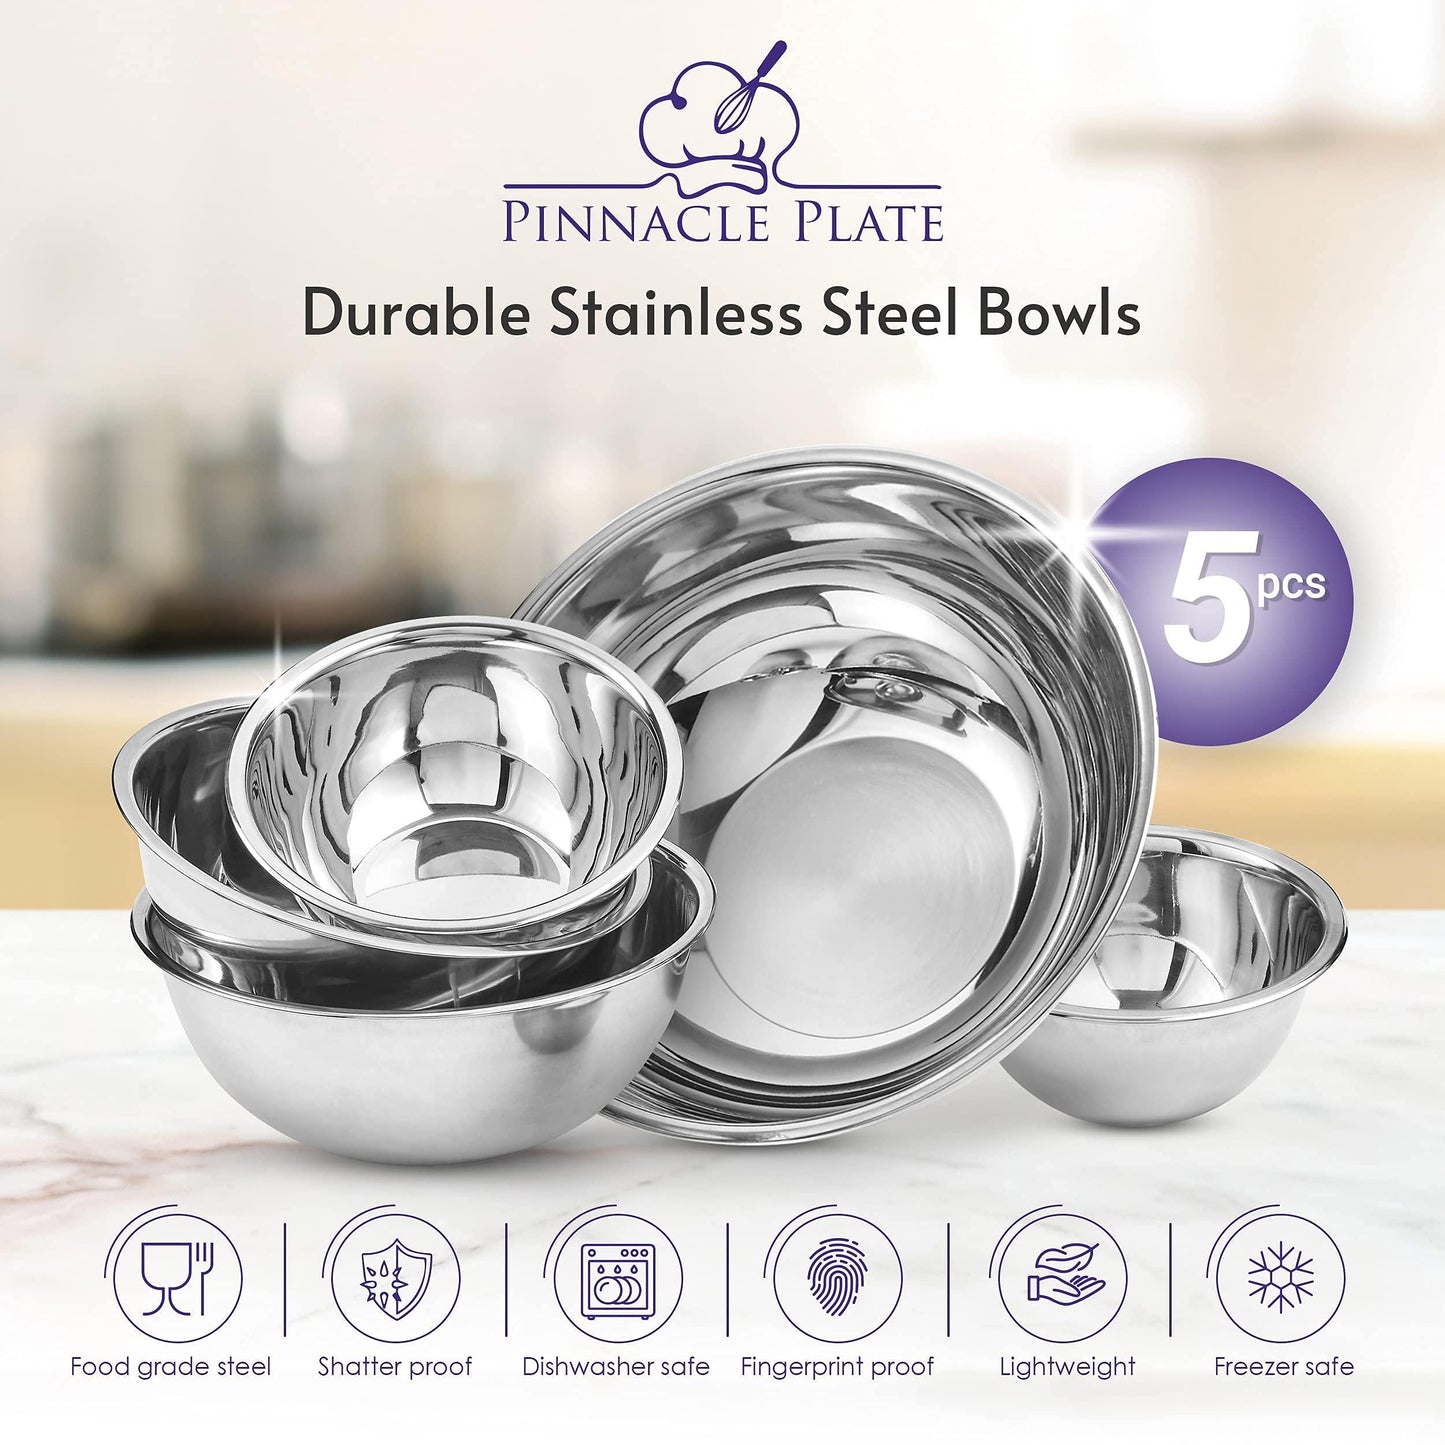 Pinnacle Plate Stainless Steel Mixing Bowls - 5 Pack Nesting Baking Supplies for Cooking, Serving, Food Prep - Dishwasher Kitchen Set, Stackable Salad Bowl for Easy Storage - CookCave